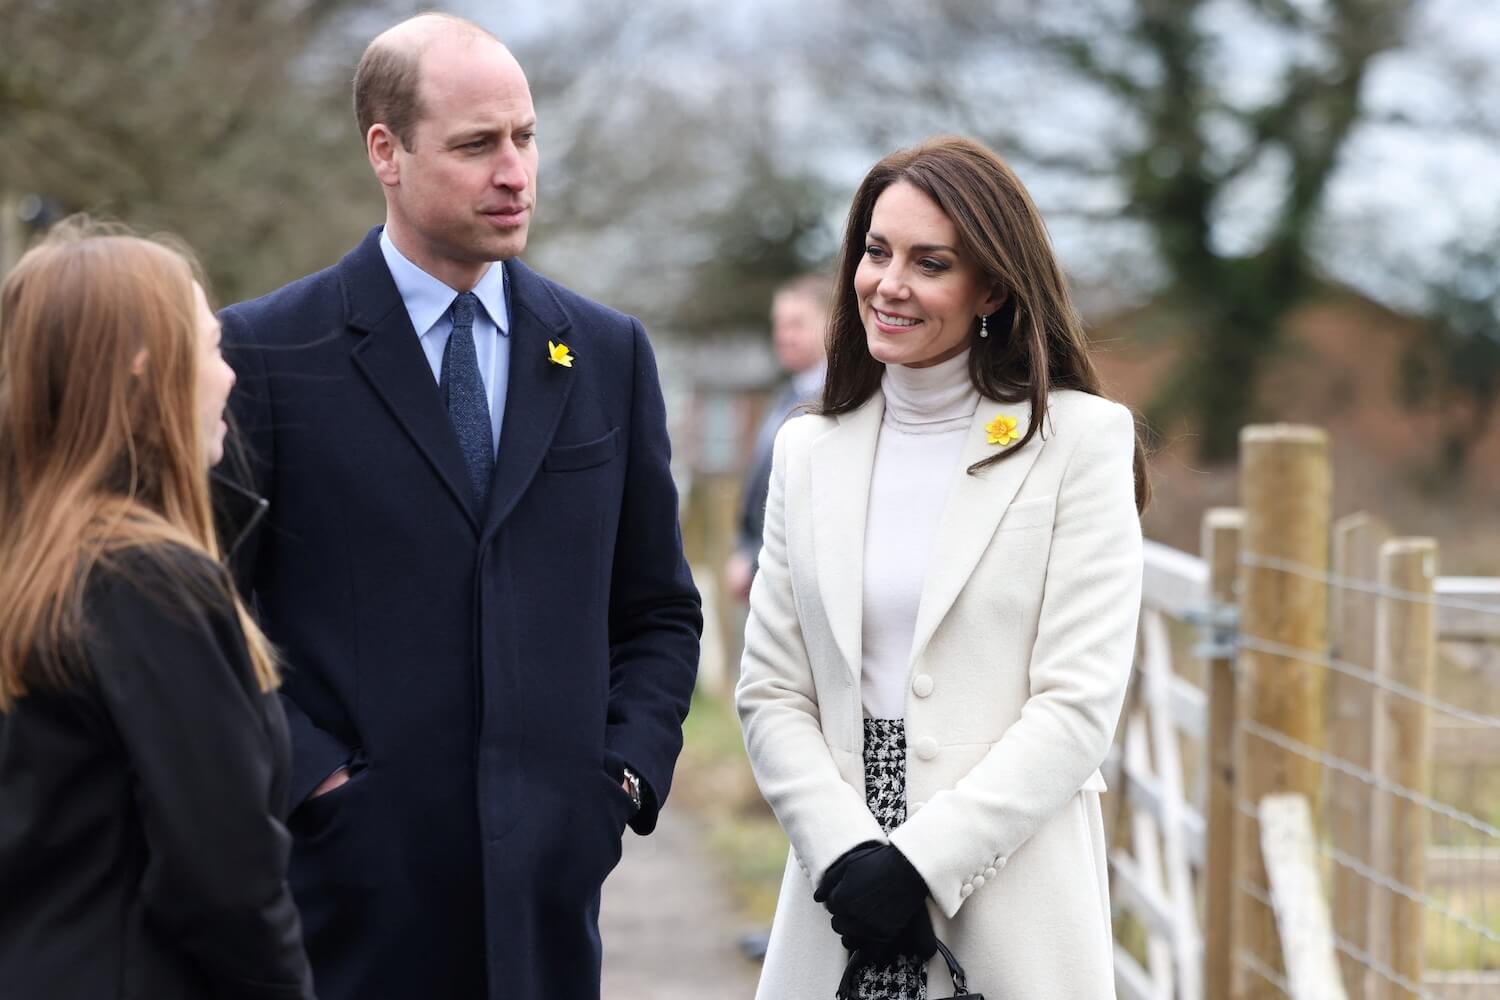 Kate Middleton and Prince William body language at recent event